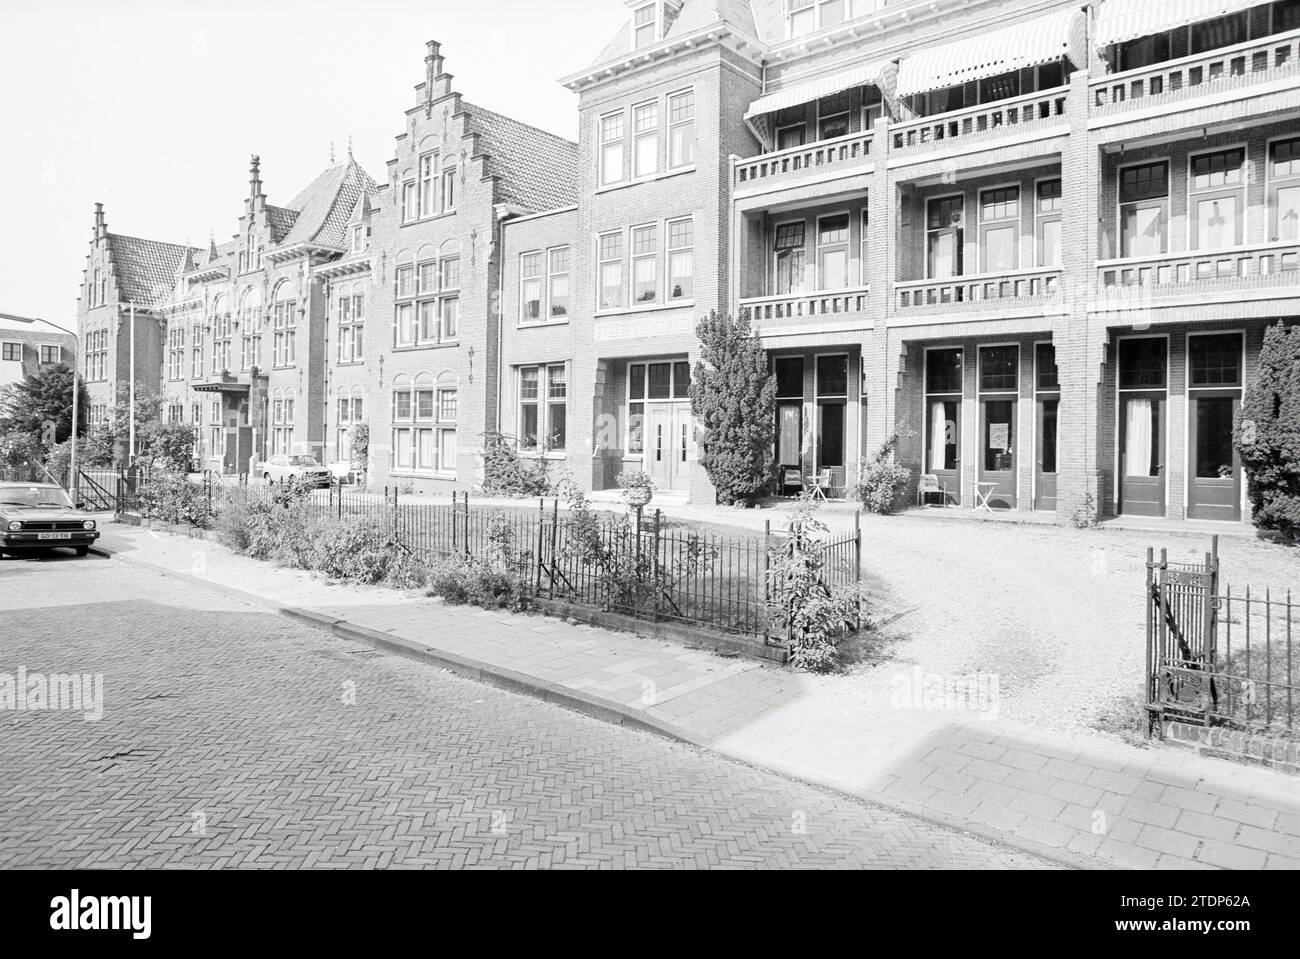 Ext. Luther's retirement home, Westerhoutpark, Exterior, Haarlem, Westerhoutpark, The Netherlands, 01-09-1980, Whizgle News from the Past, Tailored for the Future. Explore historical narratives, Dutch The Netherlands agency image with a modern perspective, bridging the gap between yesterday's events and tomorrow's insights. A timeless journey shaping the stories that shape our future Stock Photo